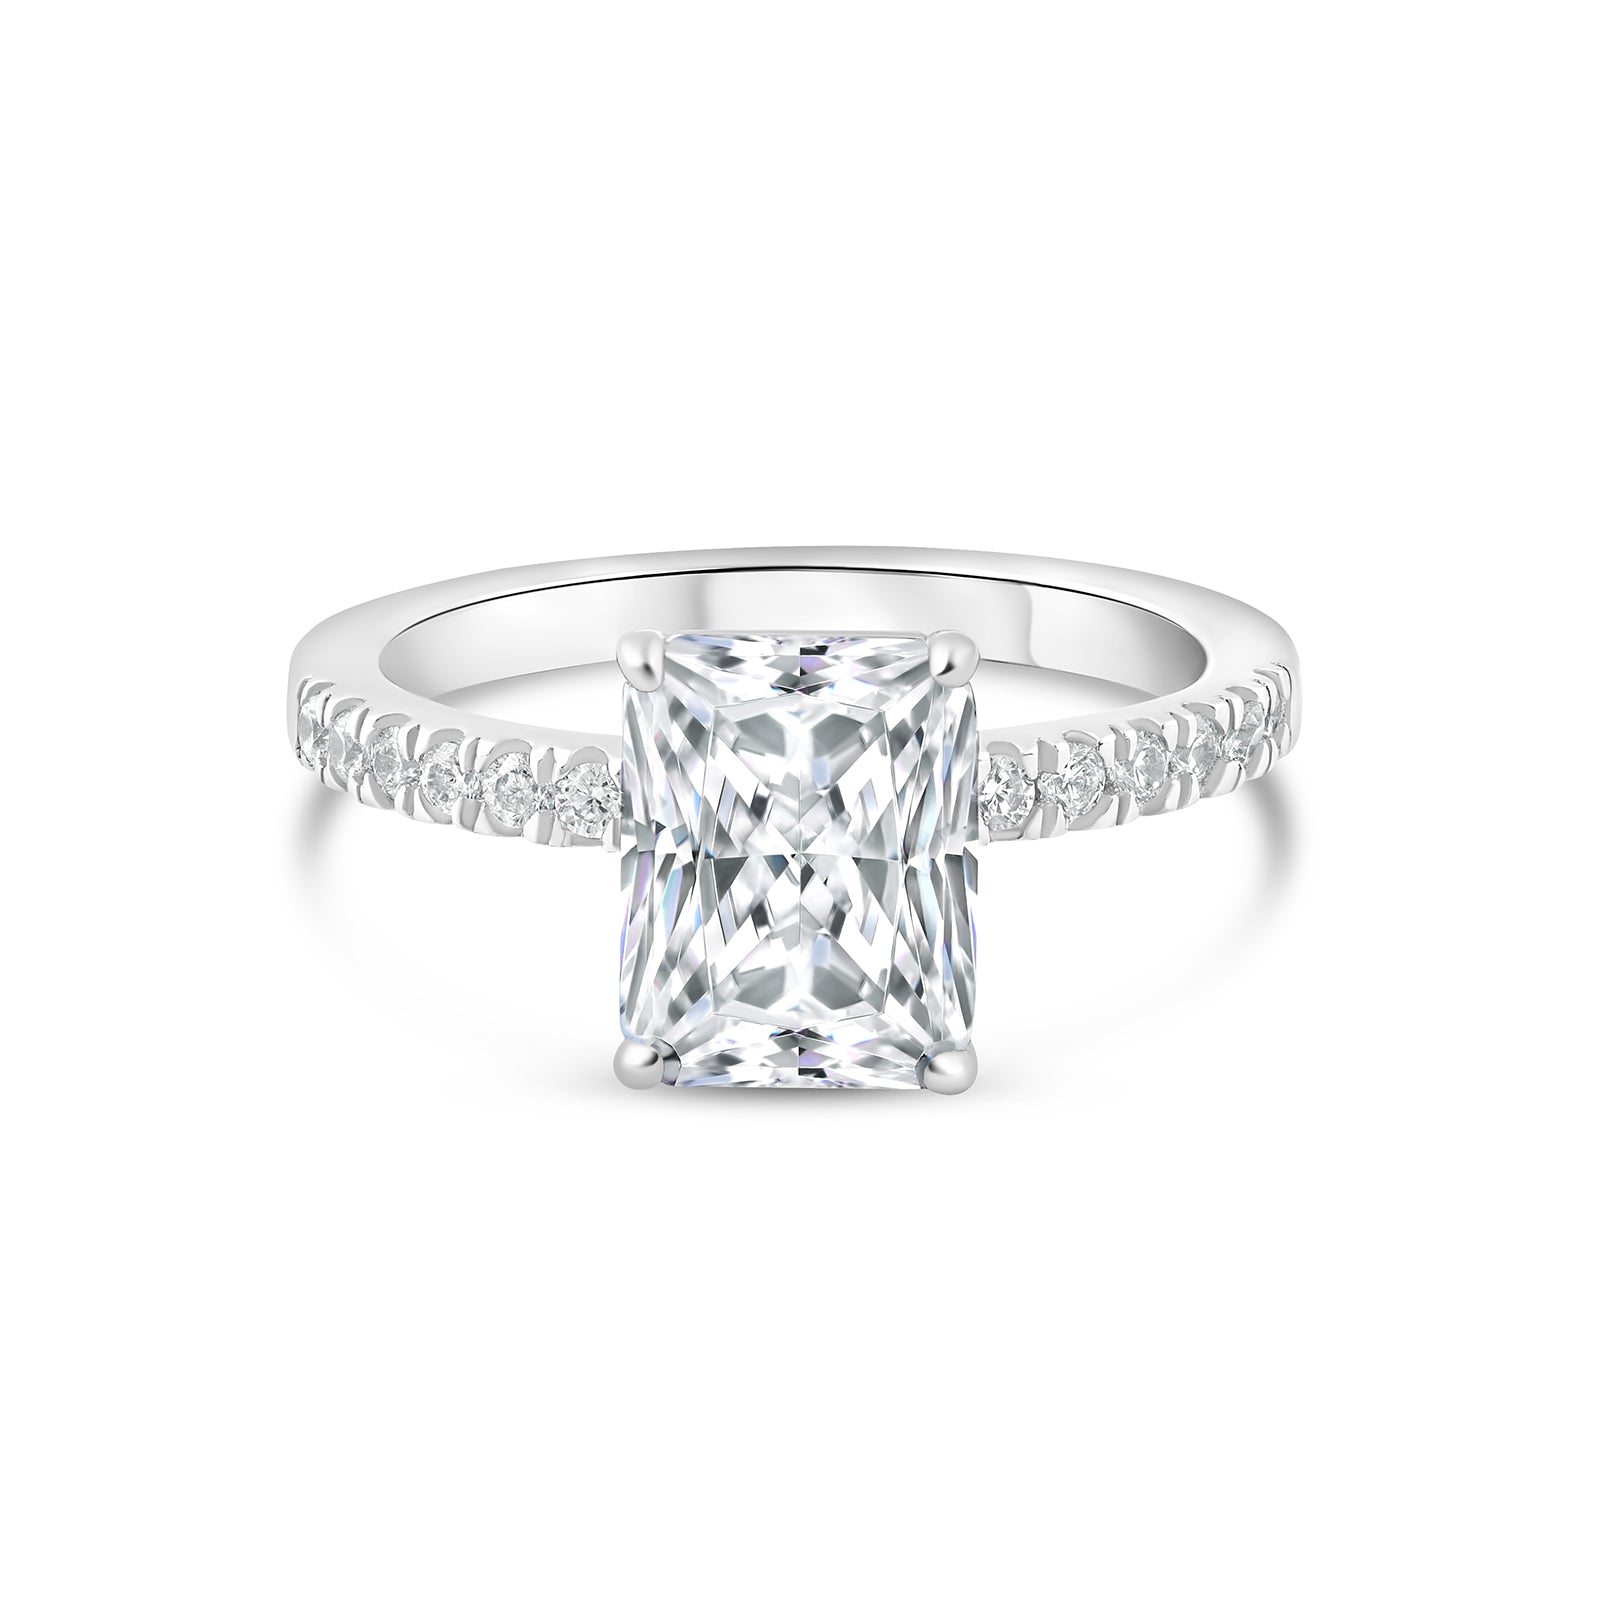 Silver 3 carat radiant cut engagement ring with half eternity band detailing